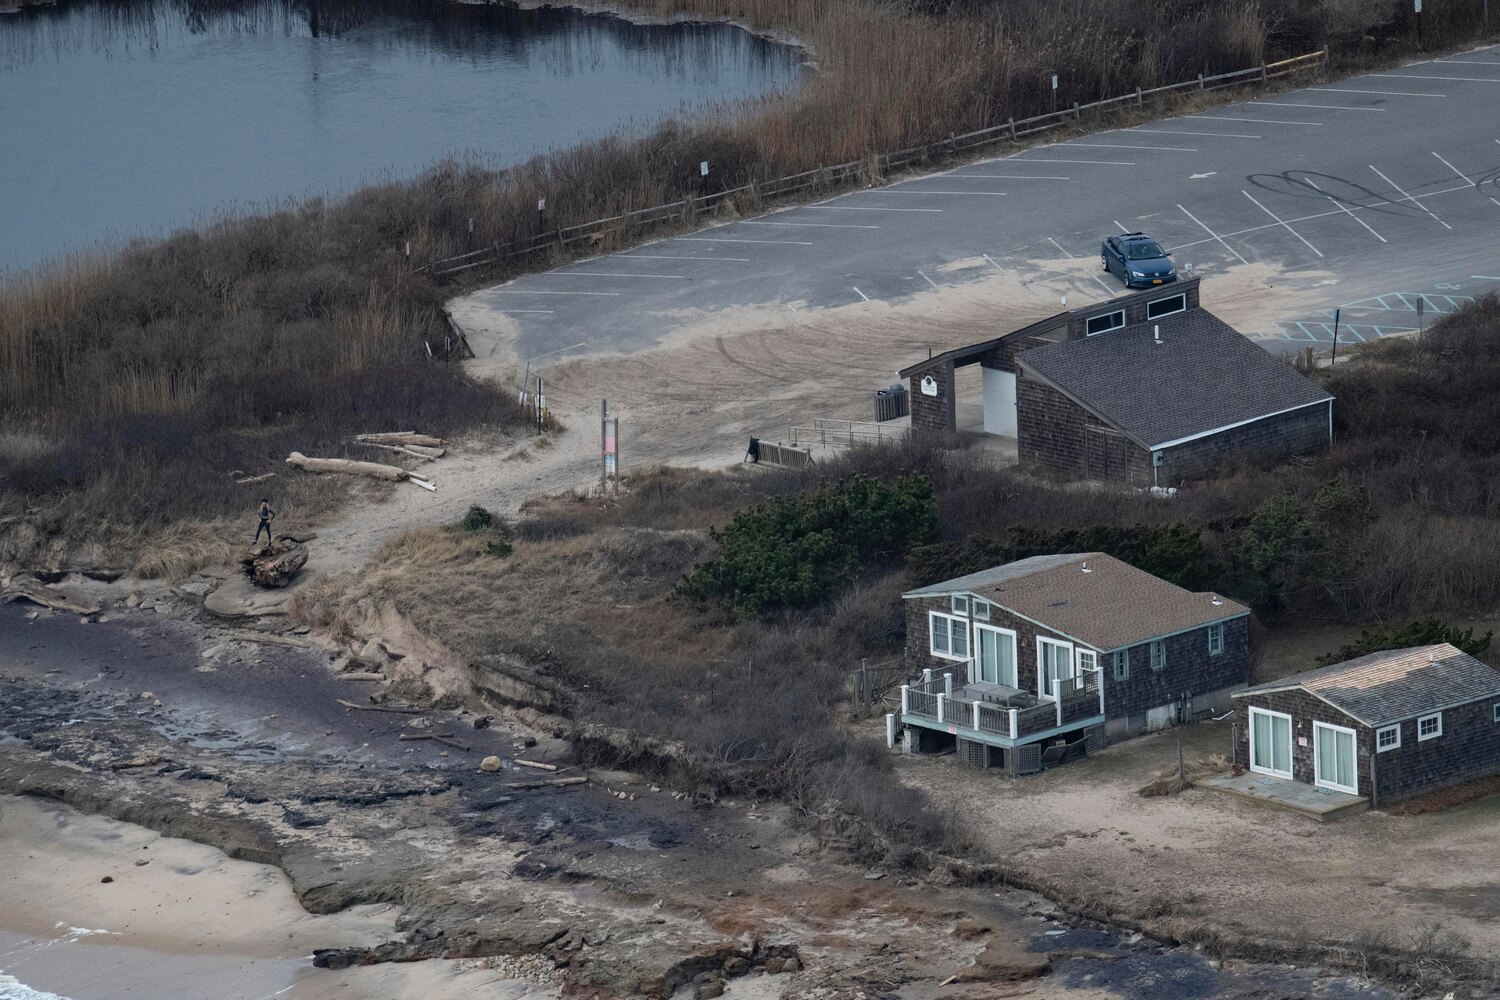 Ditch Plains has suffered from eroding beaches for years, as the dunes have steadily retreated toward a cluster of homes sitting in the low area between two town parking lots. DOUG KUNTZ